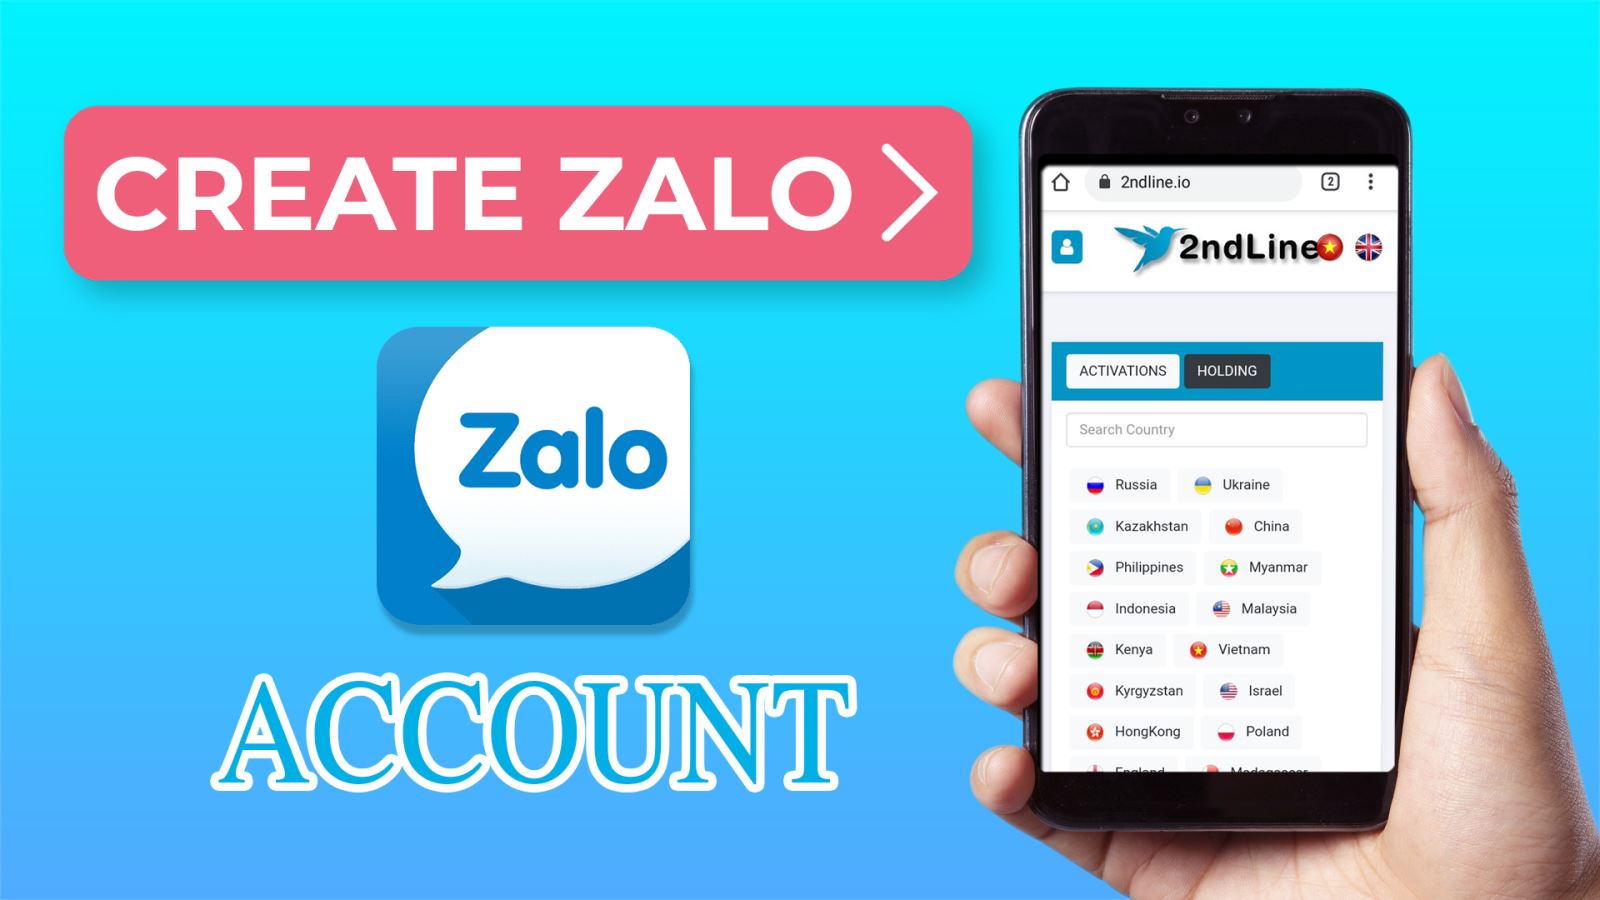 Instructions to create a zalo account at 2ndLine.io